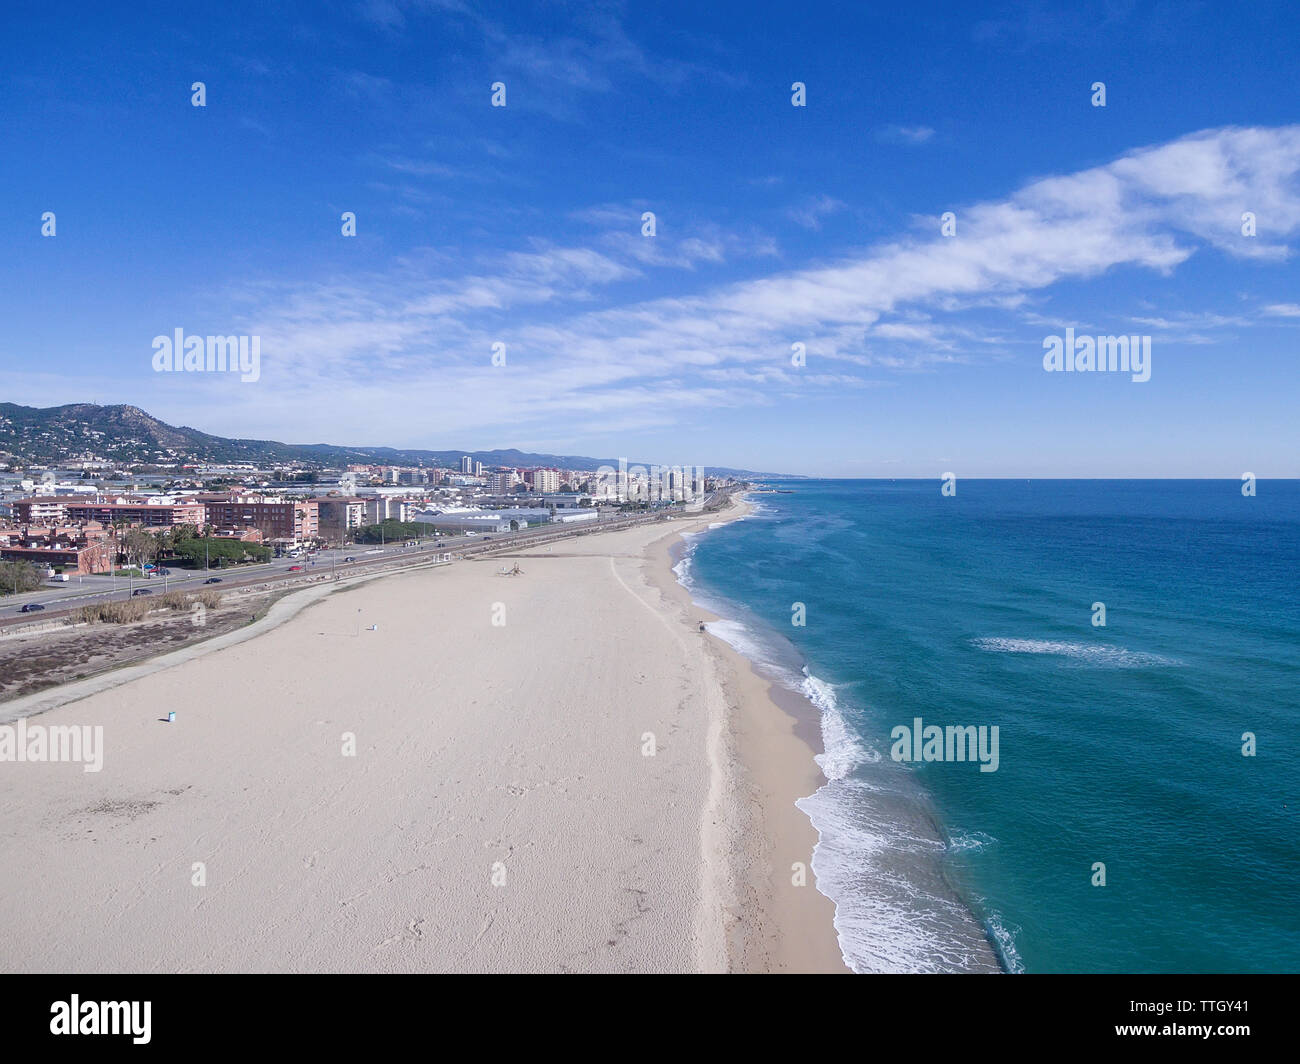 Aerial view of waves on a beach Stock Photo